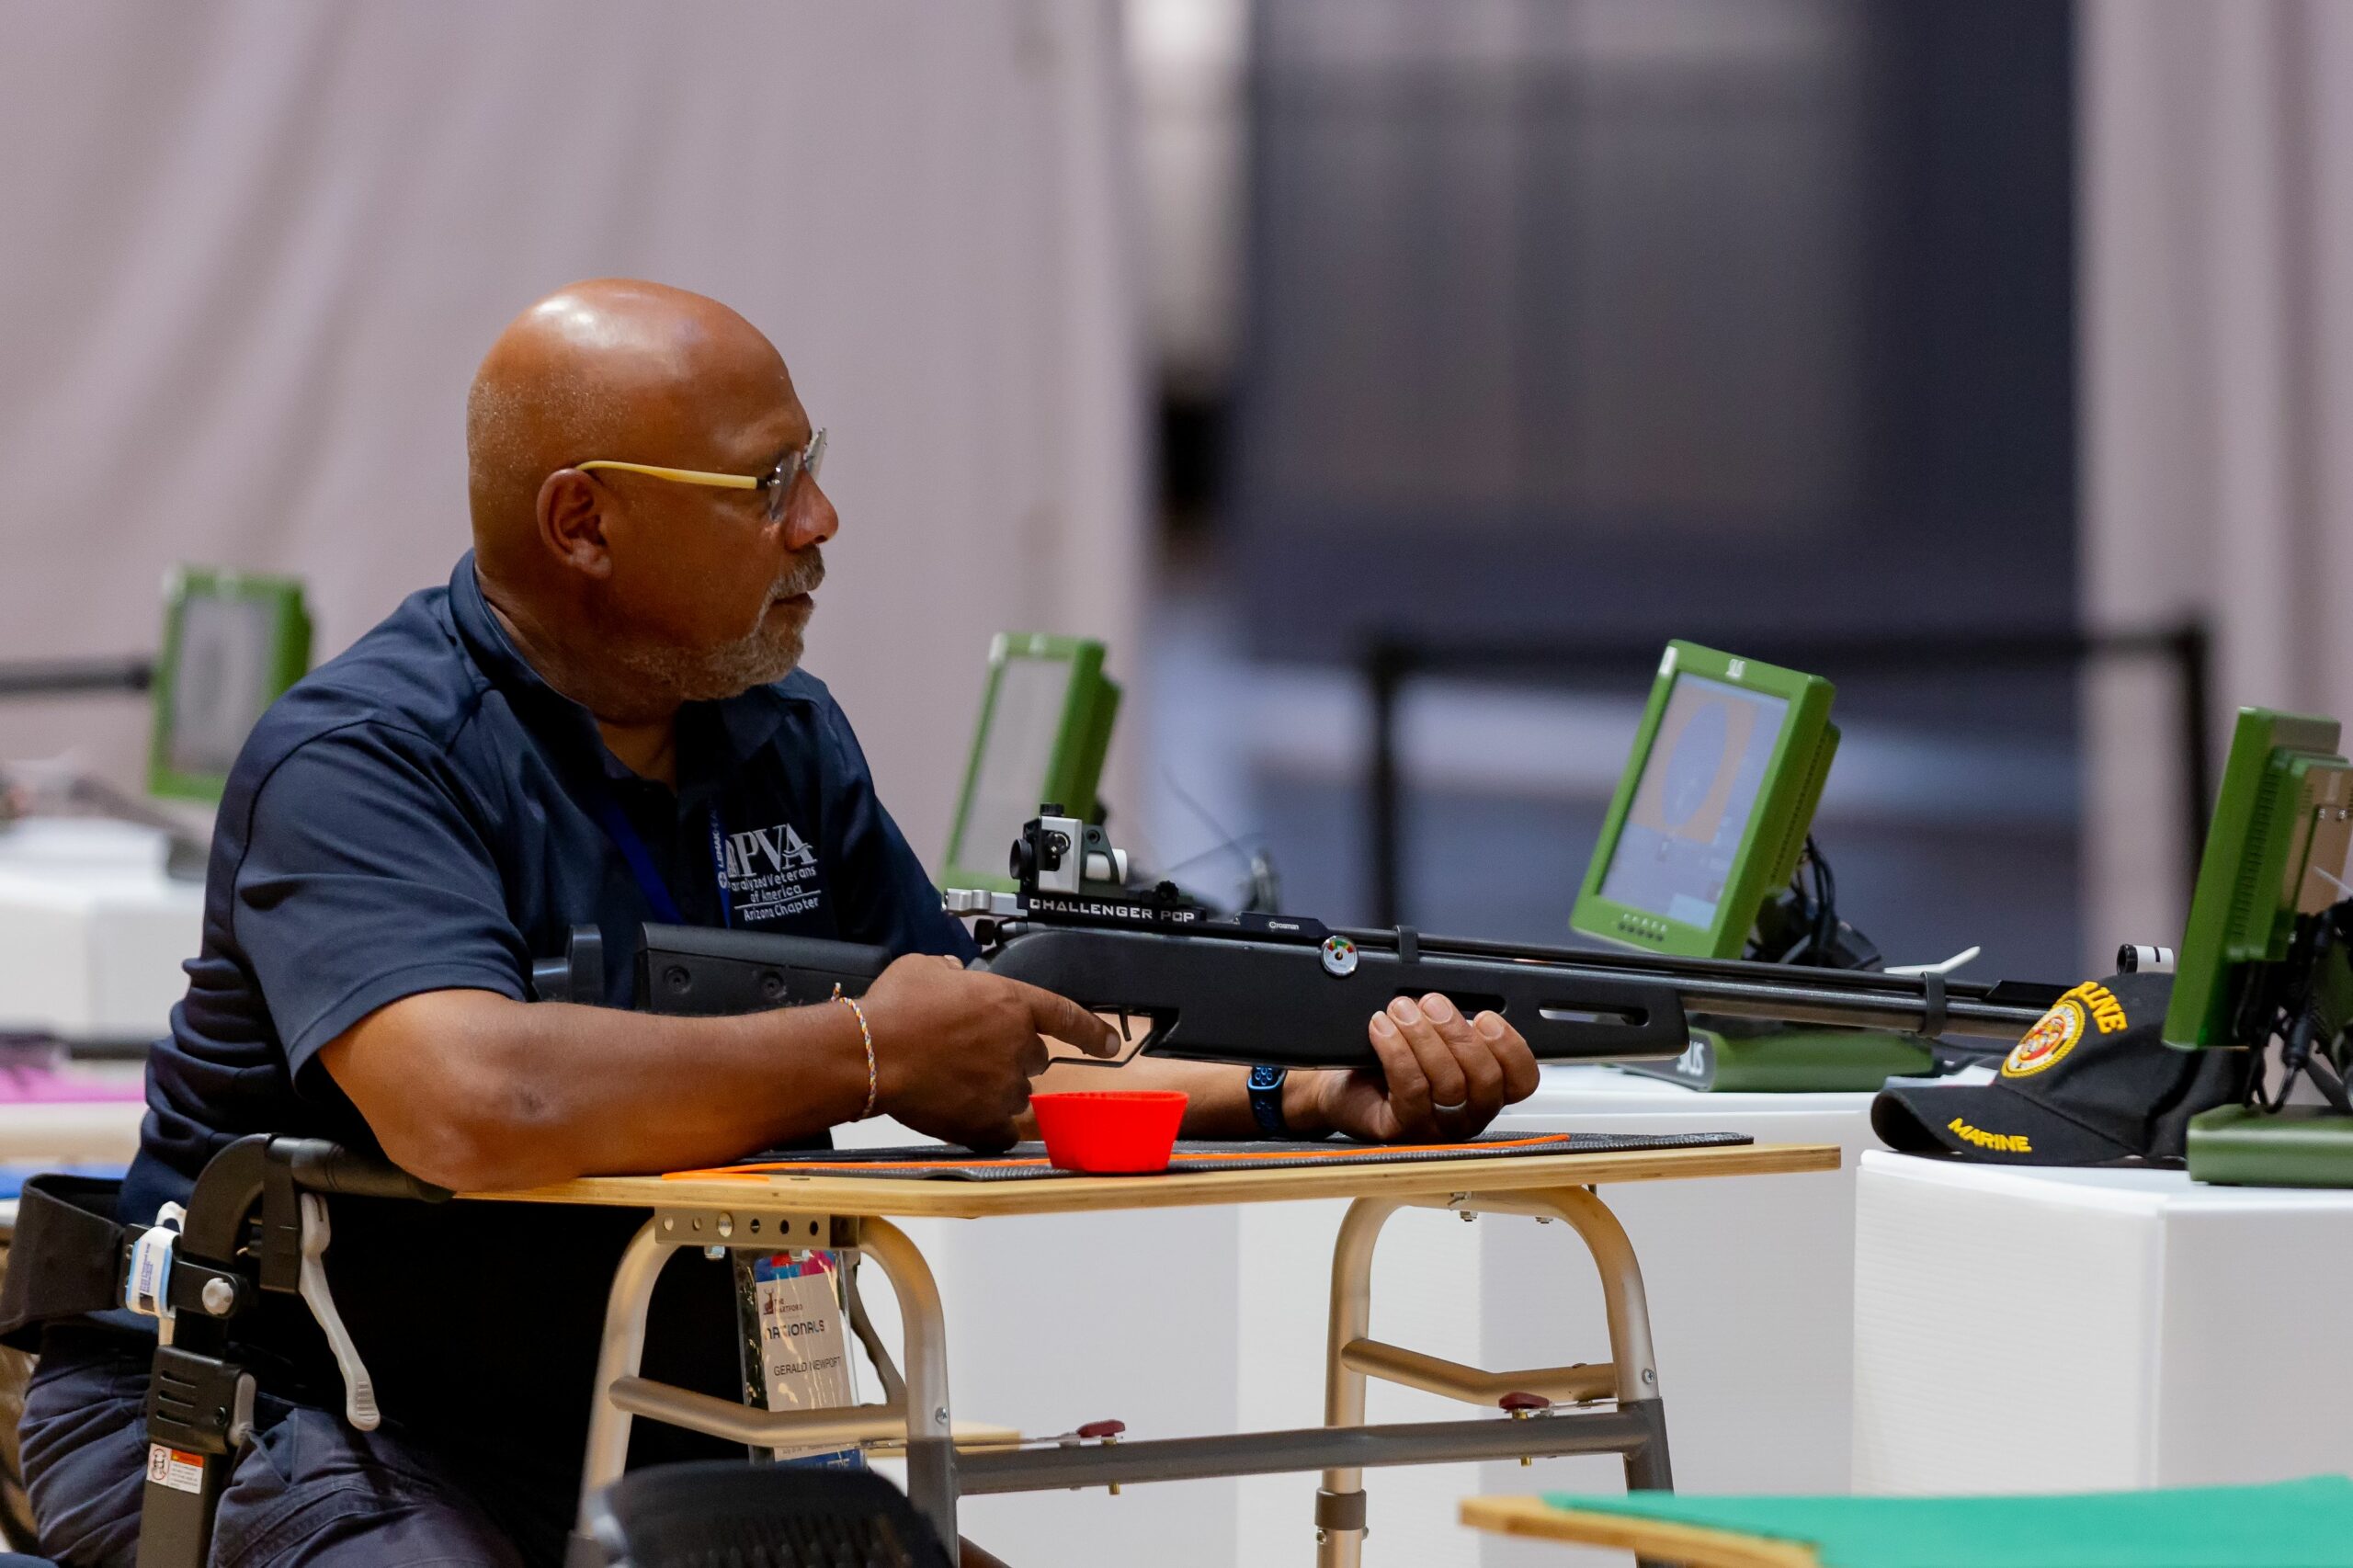 Athlete at air rifle competition. Athlete is seated with table in front of them and air pistol in hand resting on the table.